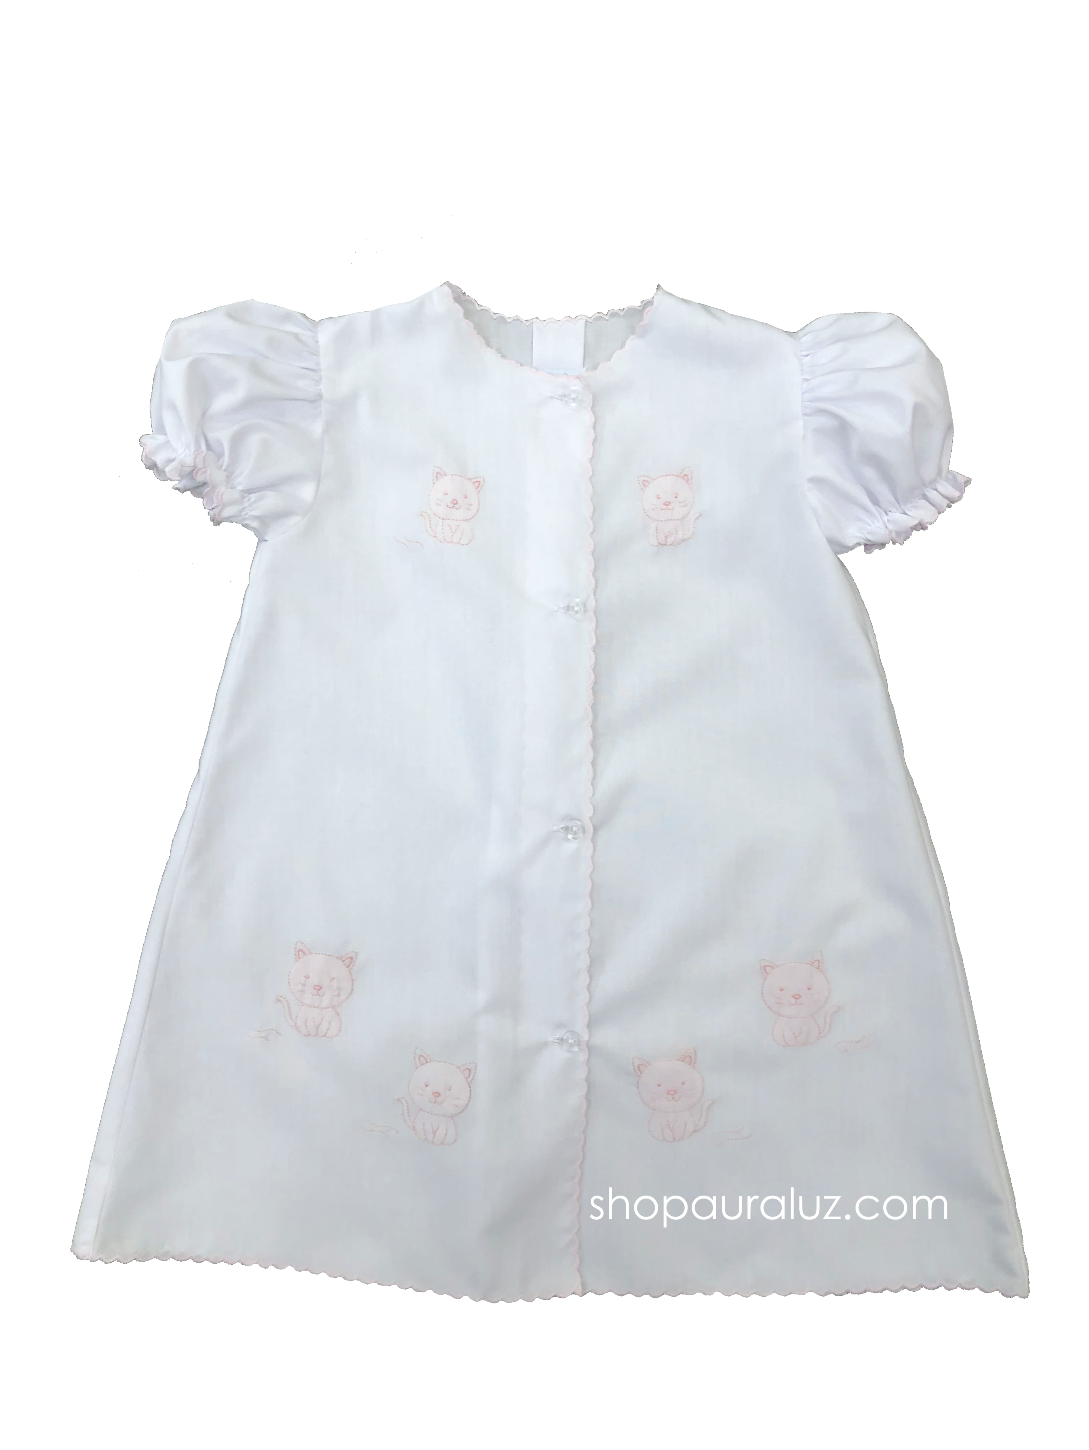 Auraluz Day Gown..White with pink scallops and embroidered kitty cats